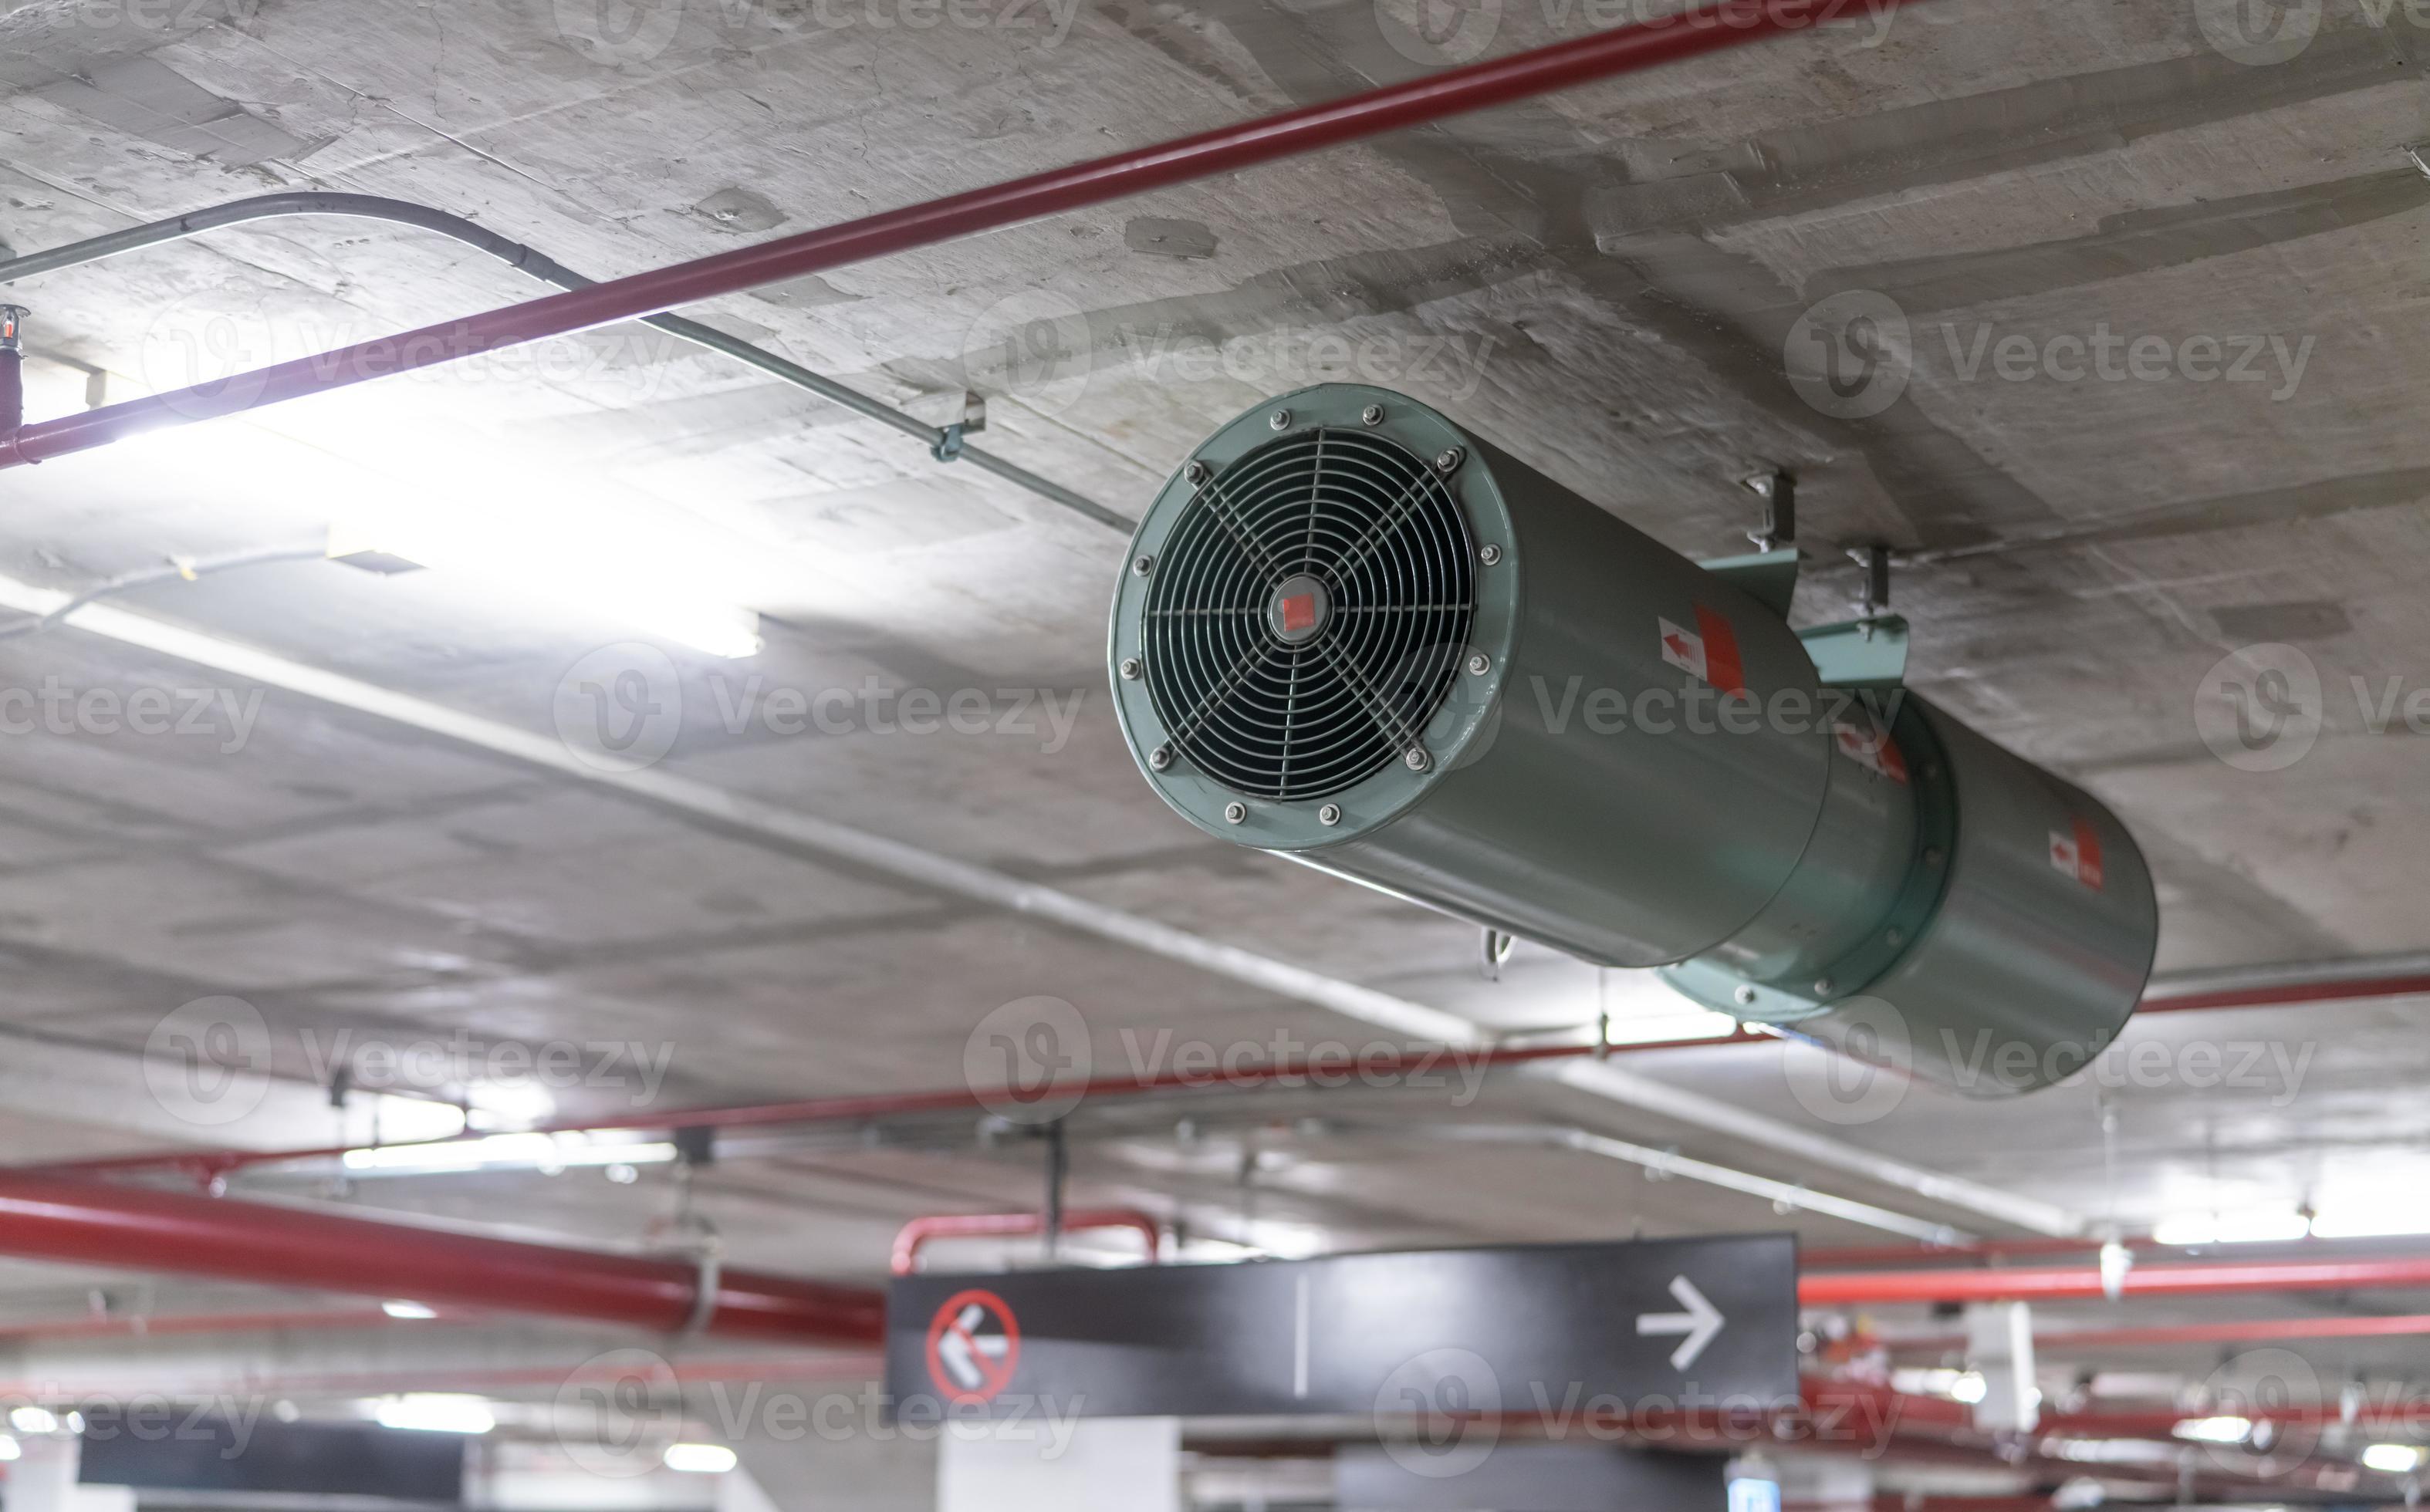 Jet fan at underground parking area. Ventilation fan in the parking lot.  Air flow system. Ventilation system in underground car parking lot at  commercial building. Duct fan air ventilation at mall. 22736133